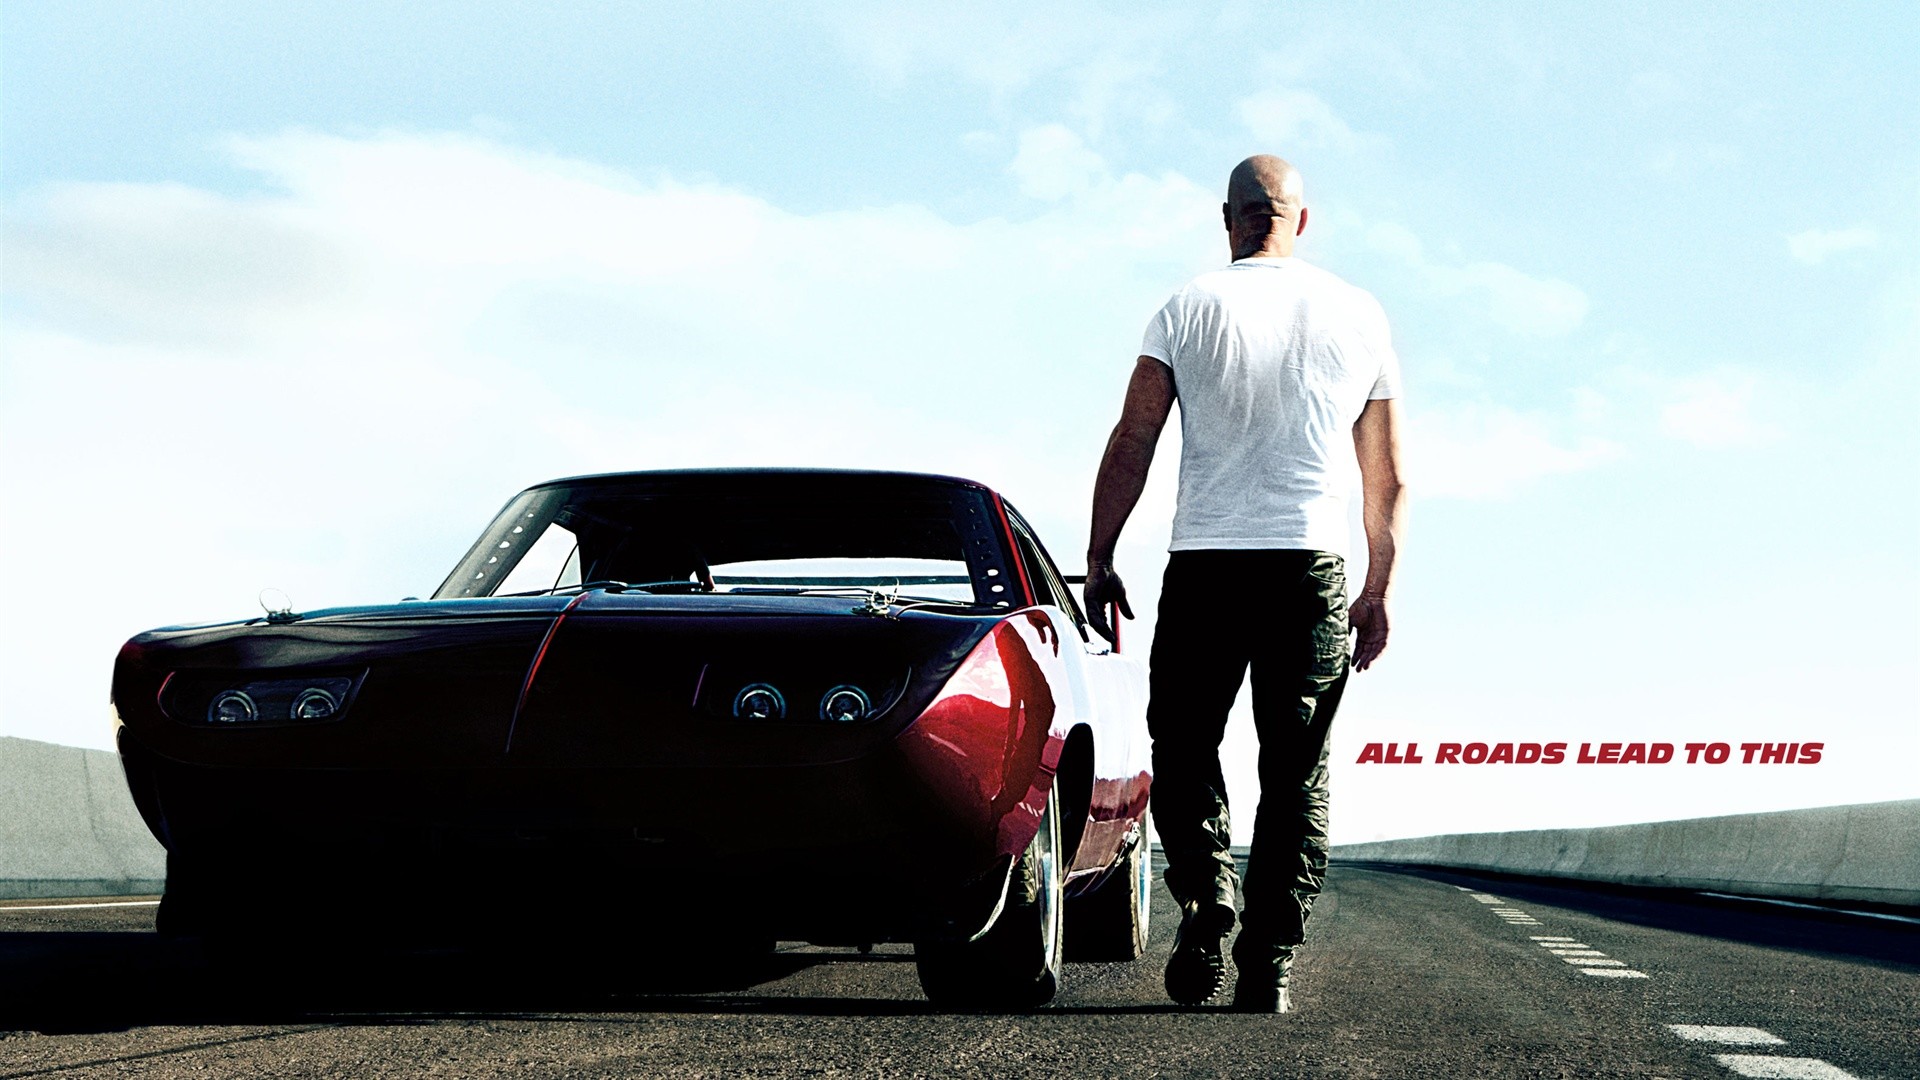 1920x1080 48 Fast And Furious 7 Wallpapers, HD Creative Fast And Furious 7 .